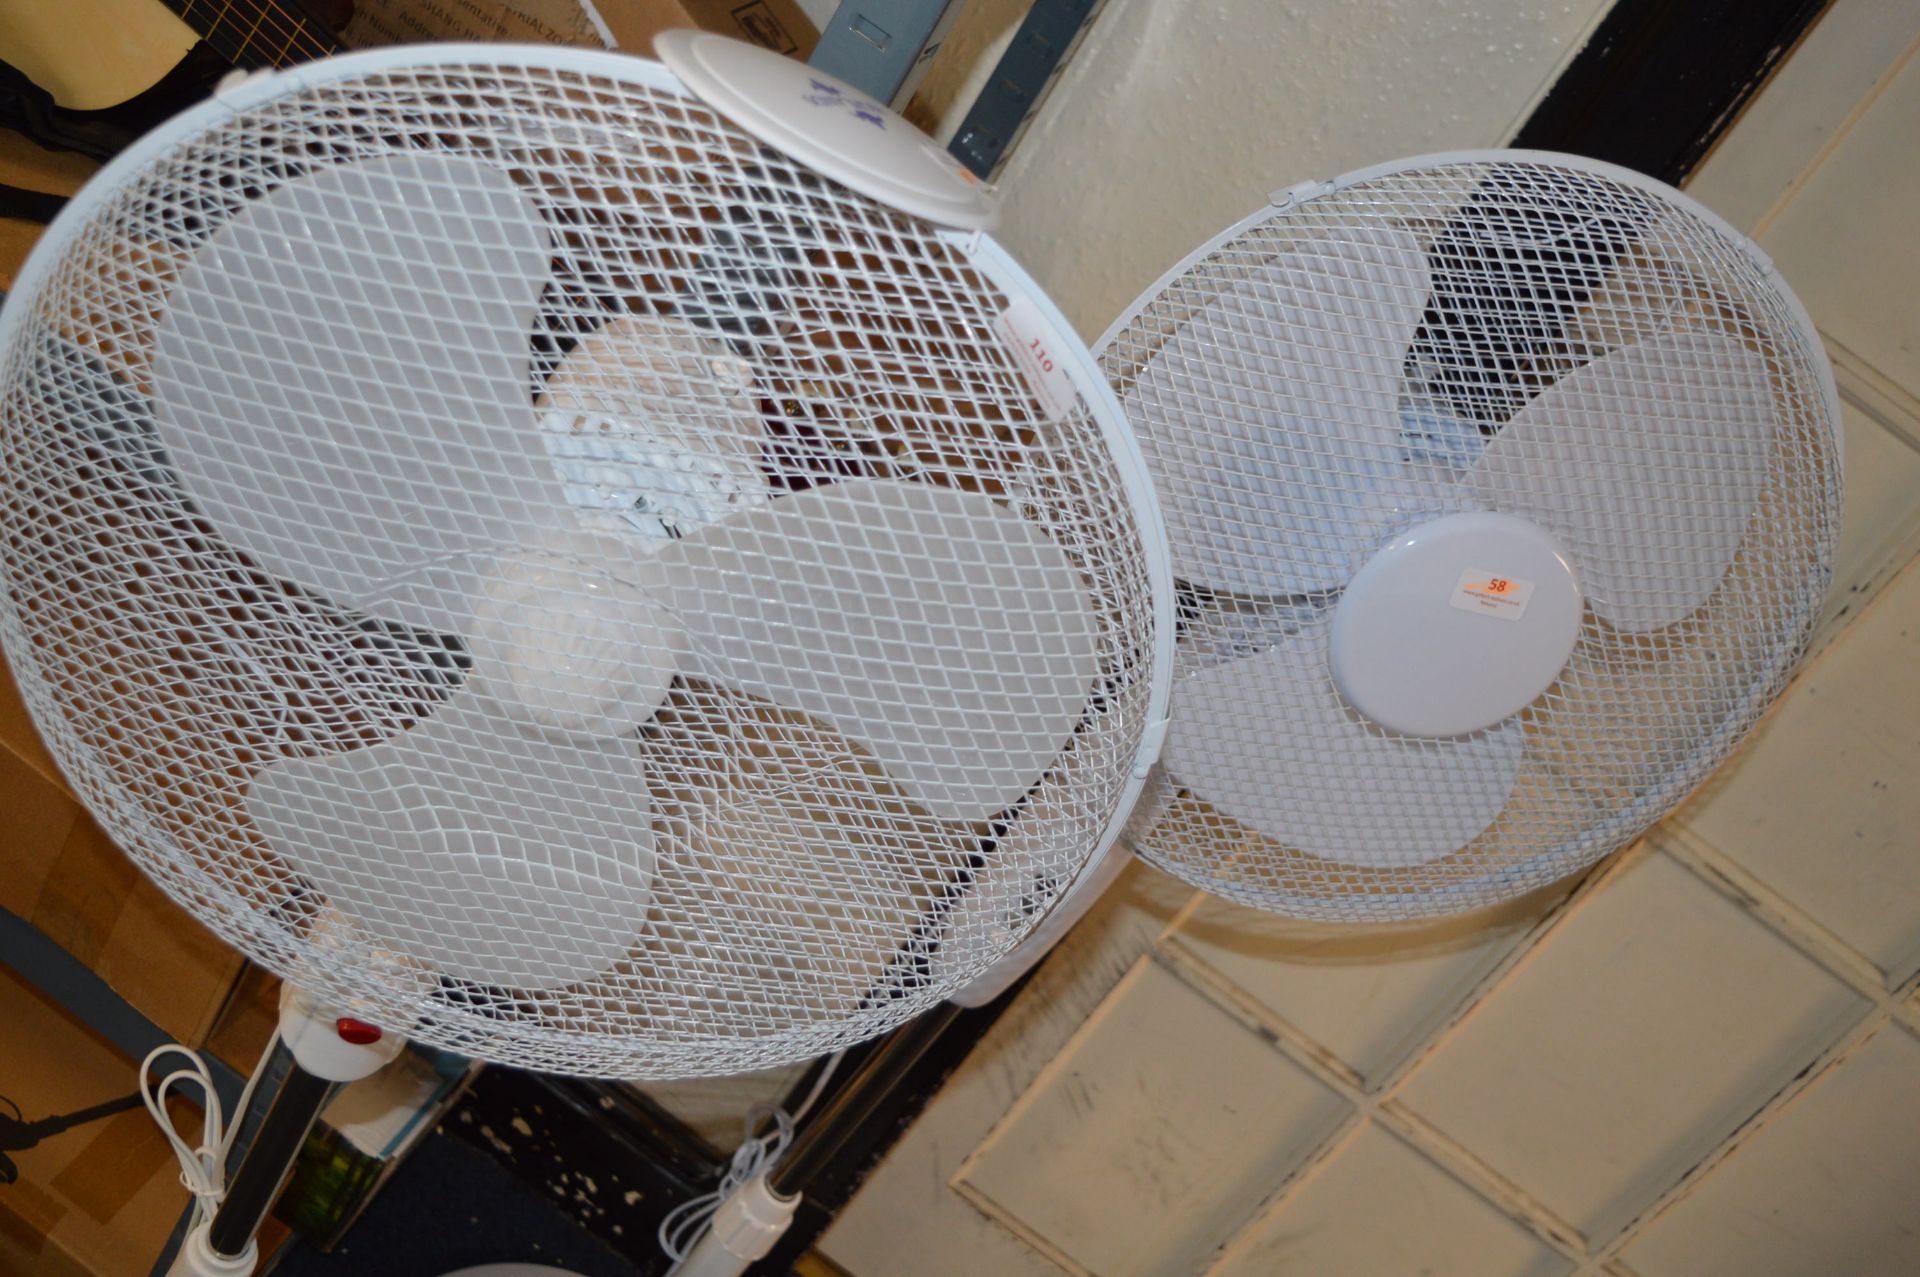 *Two Fans